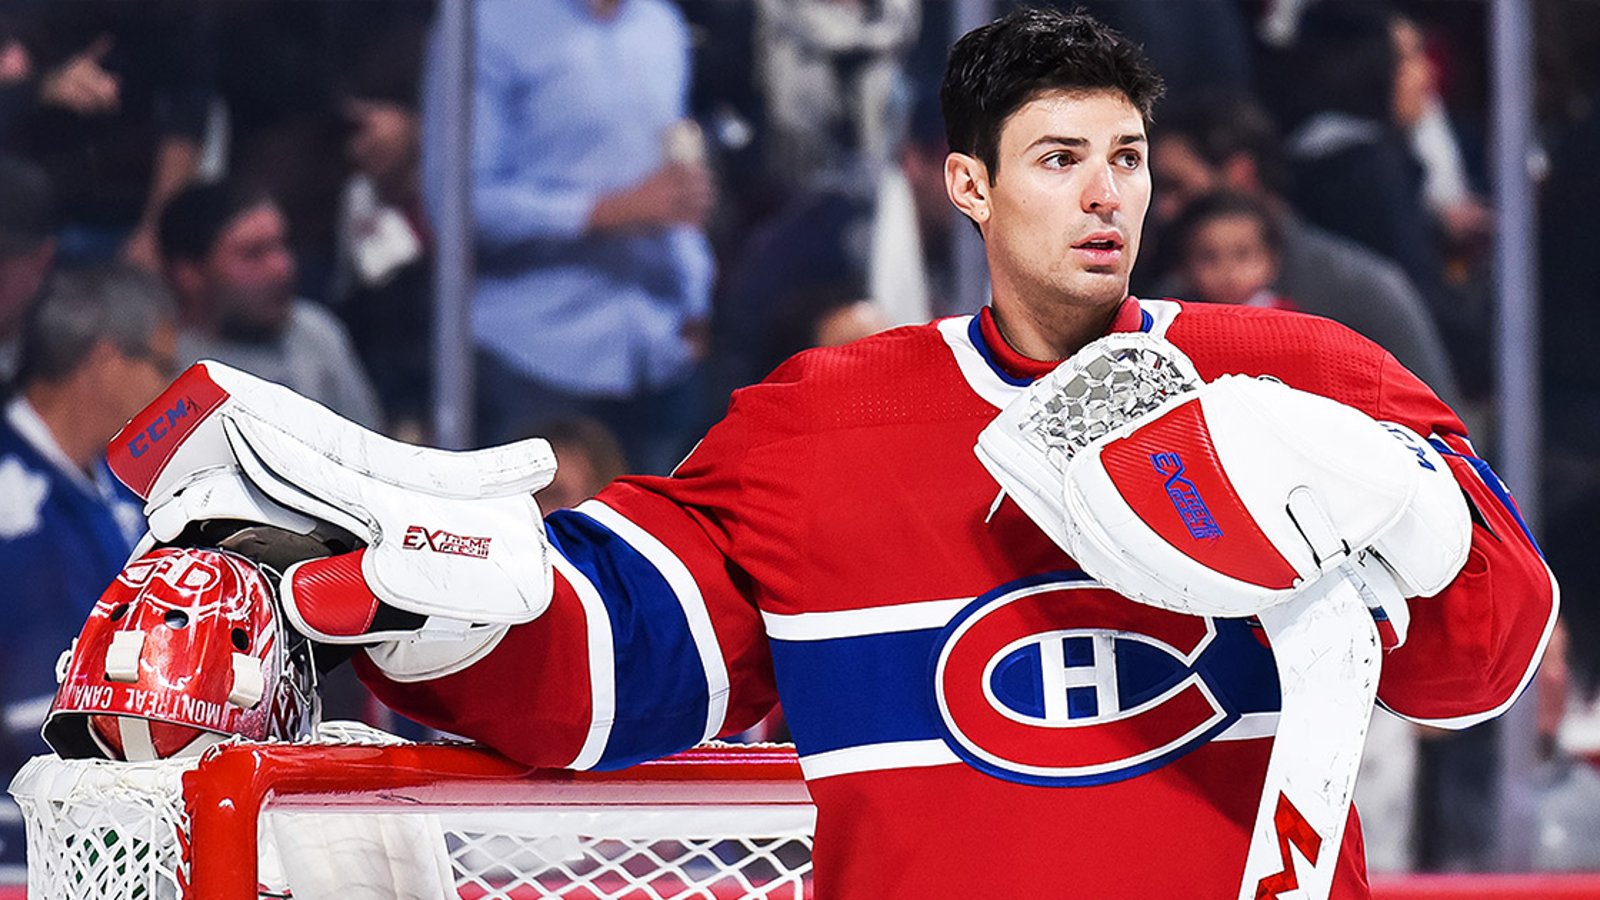 Breaking: Habs’ Price makes shocking medical announcement